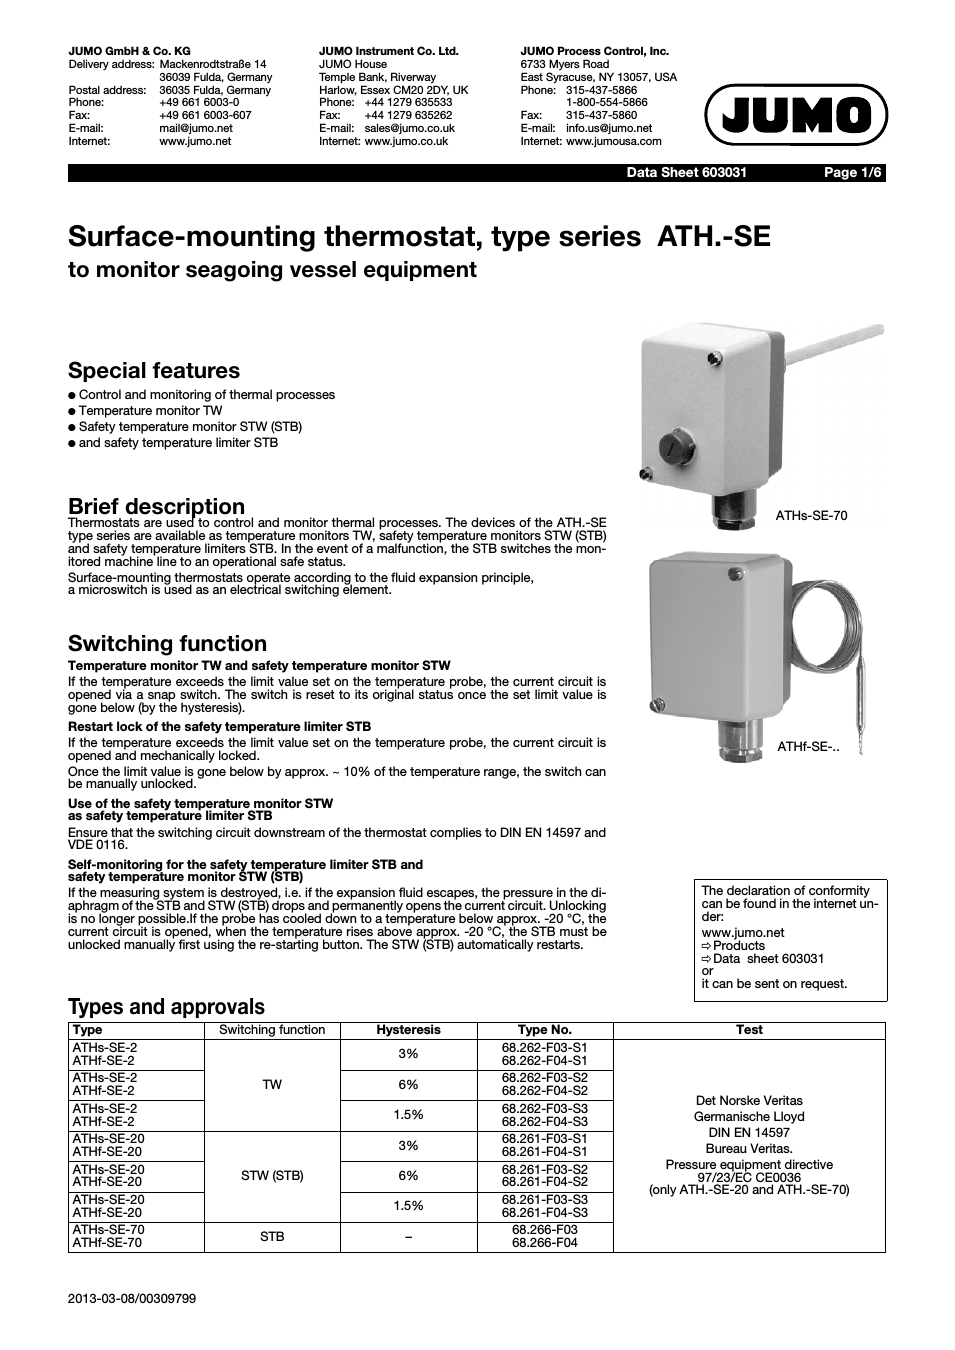 60.3031 Surface-mounting thermostats, ATH.-SE Data Sheet